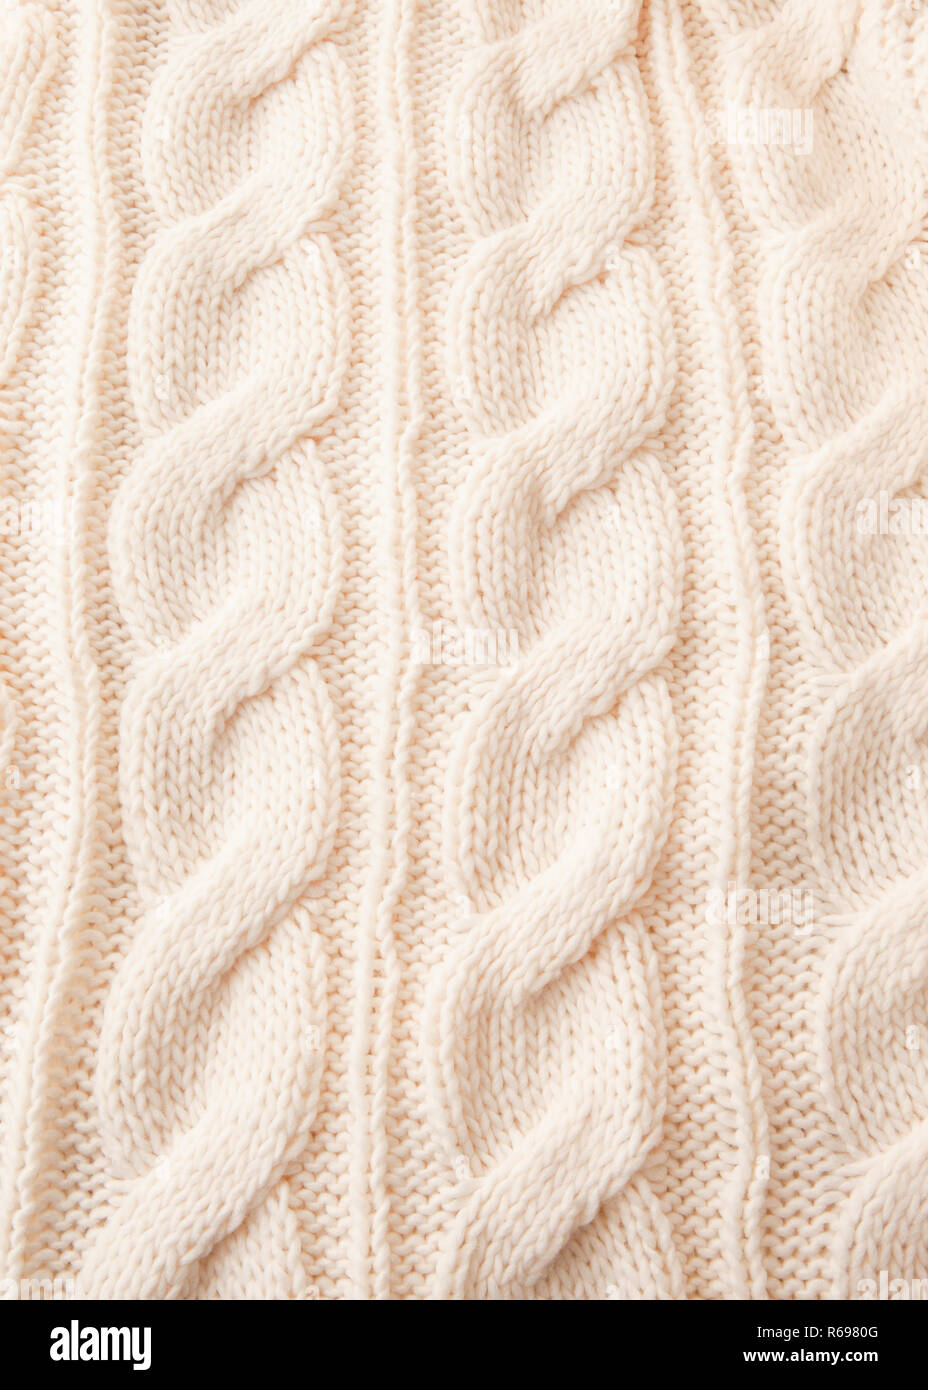 Knitted Texture Background Stock Photo